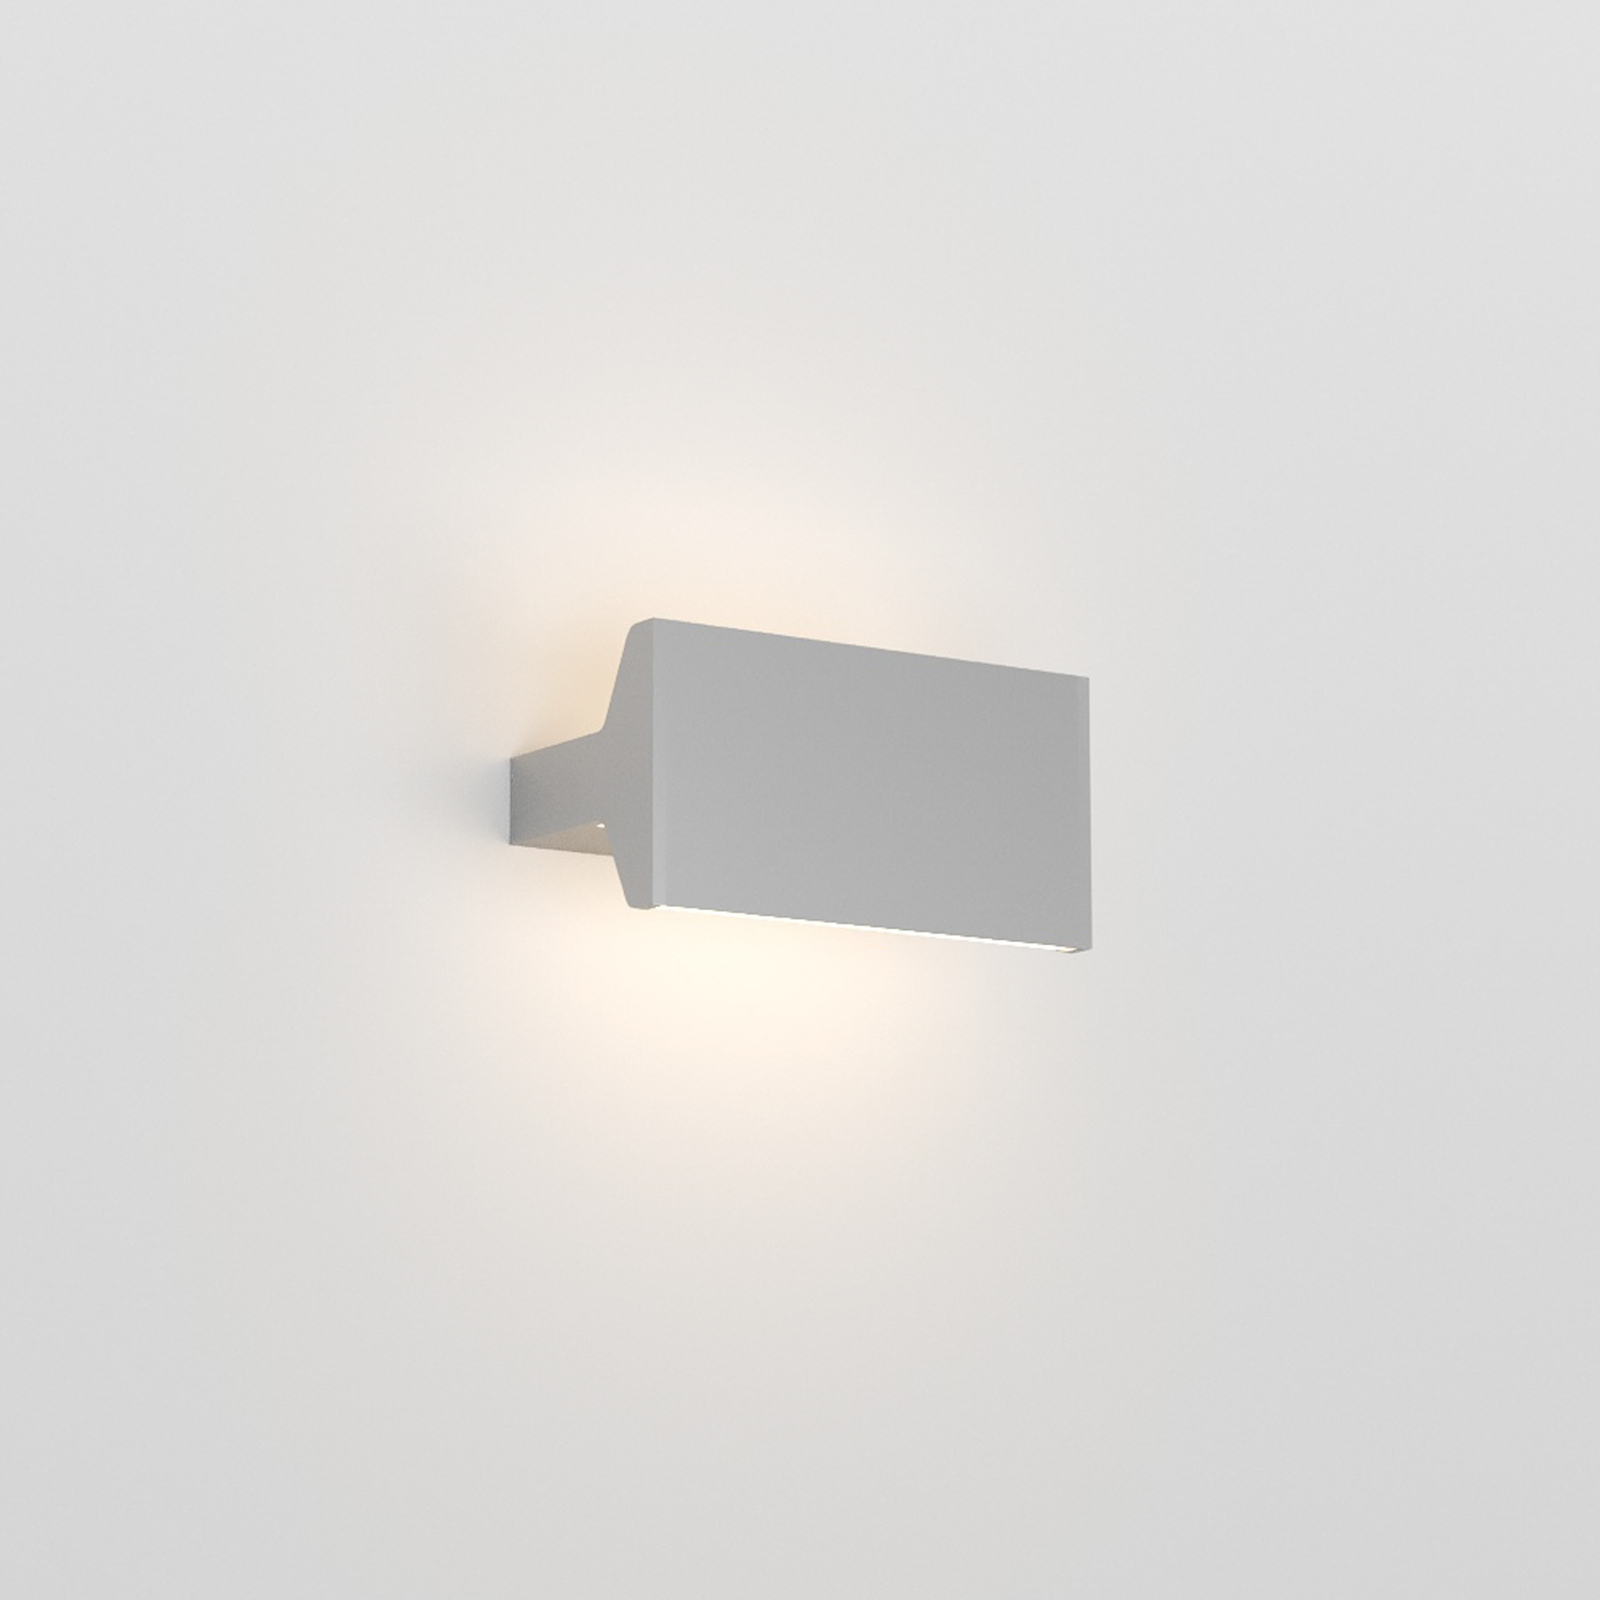 Rotaliana Ipe W1 dimmable phase 3 000 K argentée